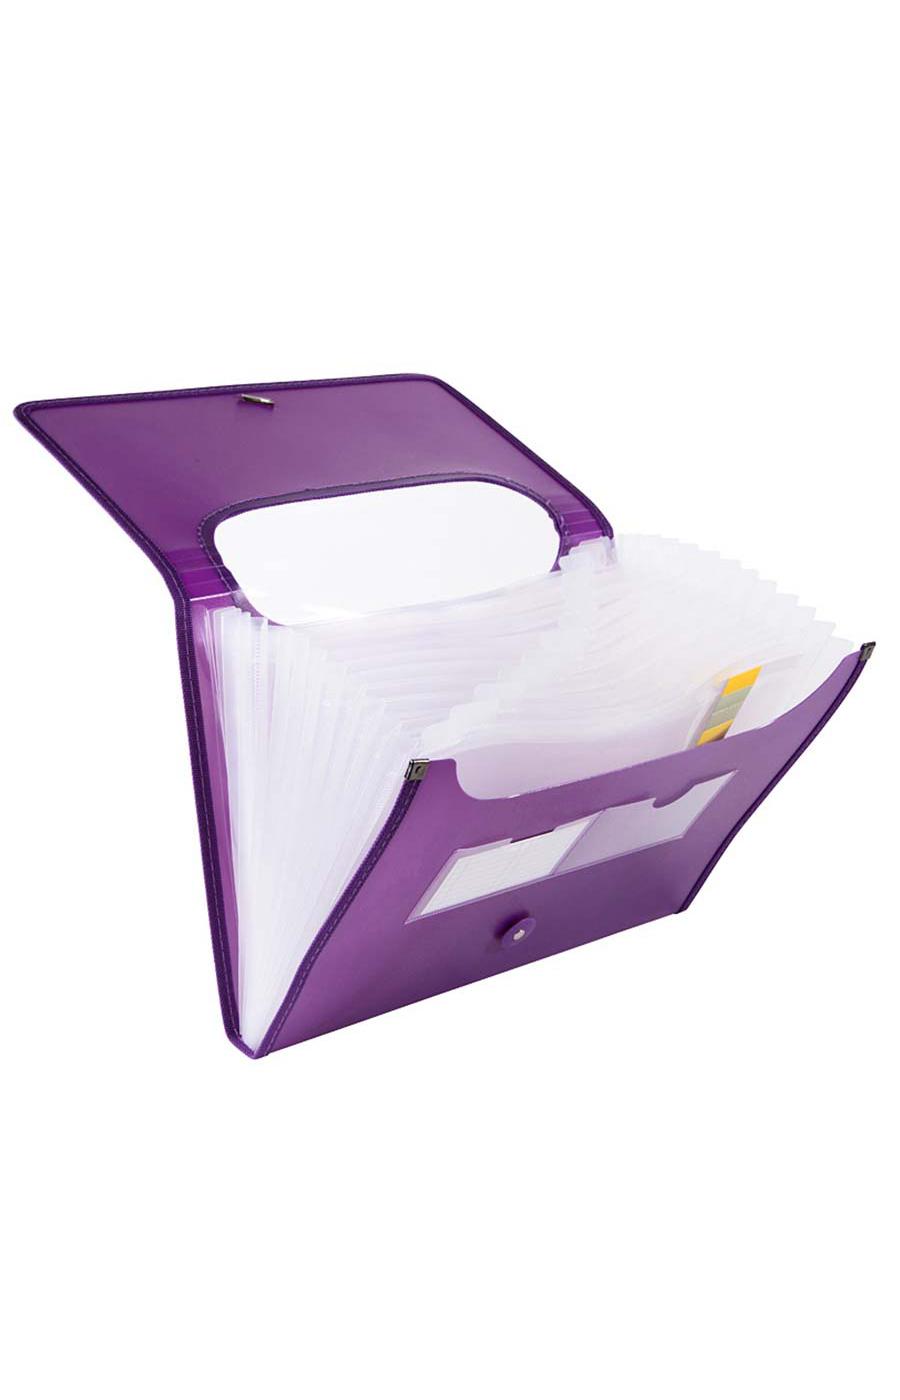 Filexec Products 12 Tab Expanding Poly File Organizer - Radiant Purple; image 2 of 2